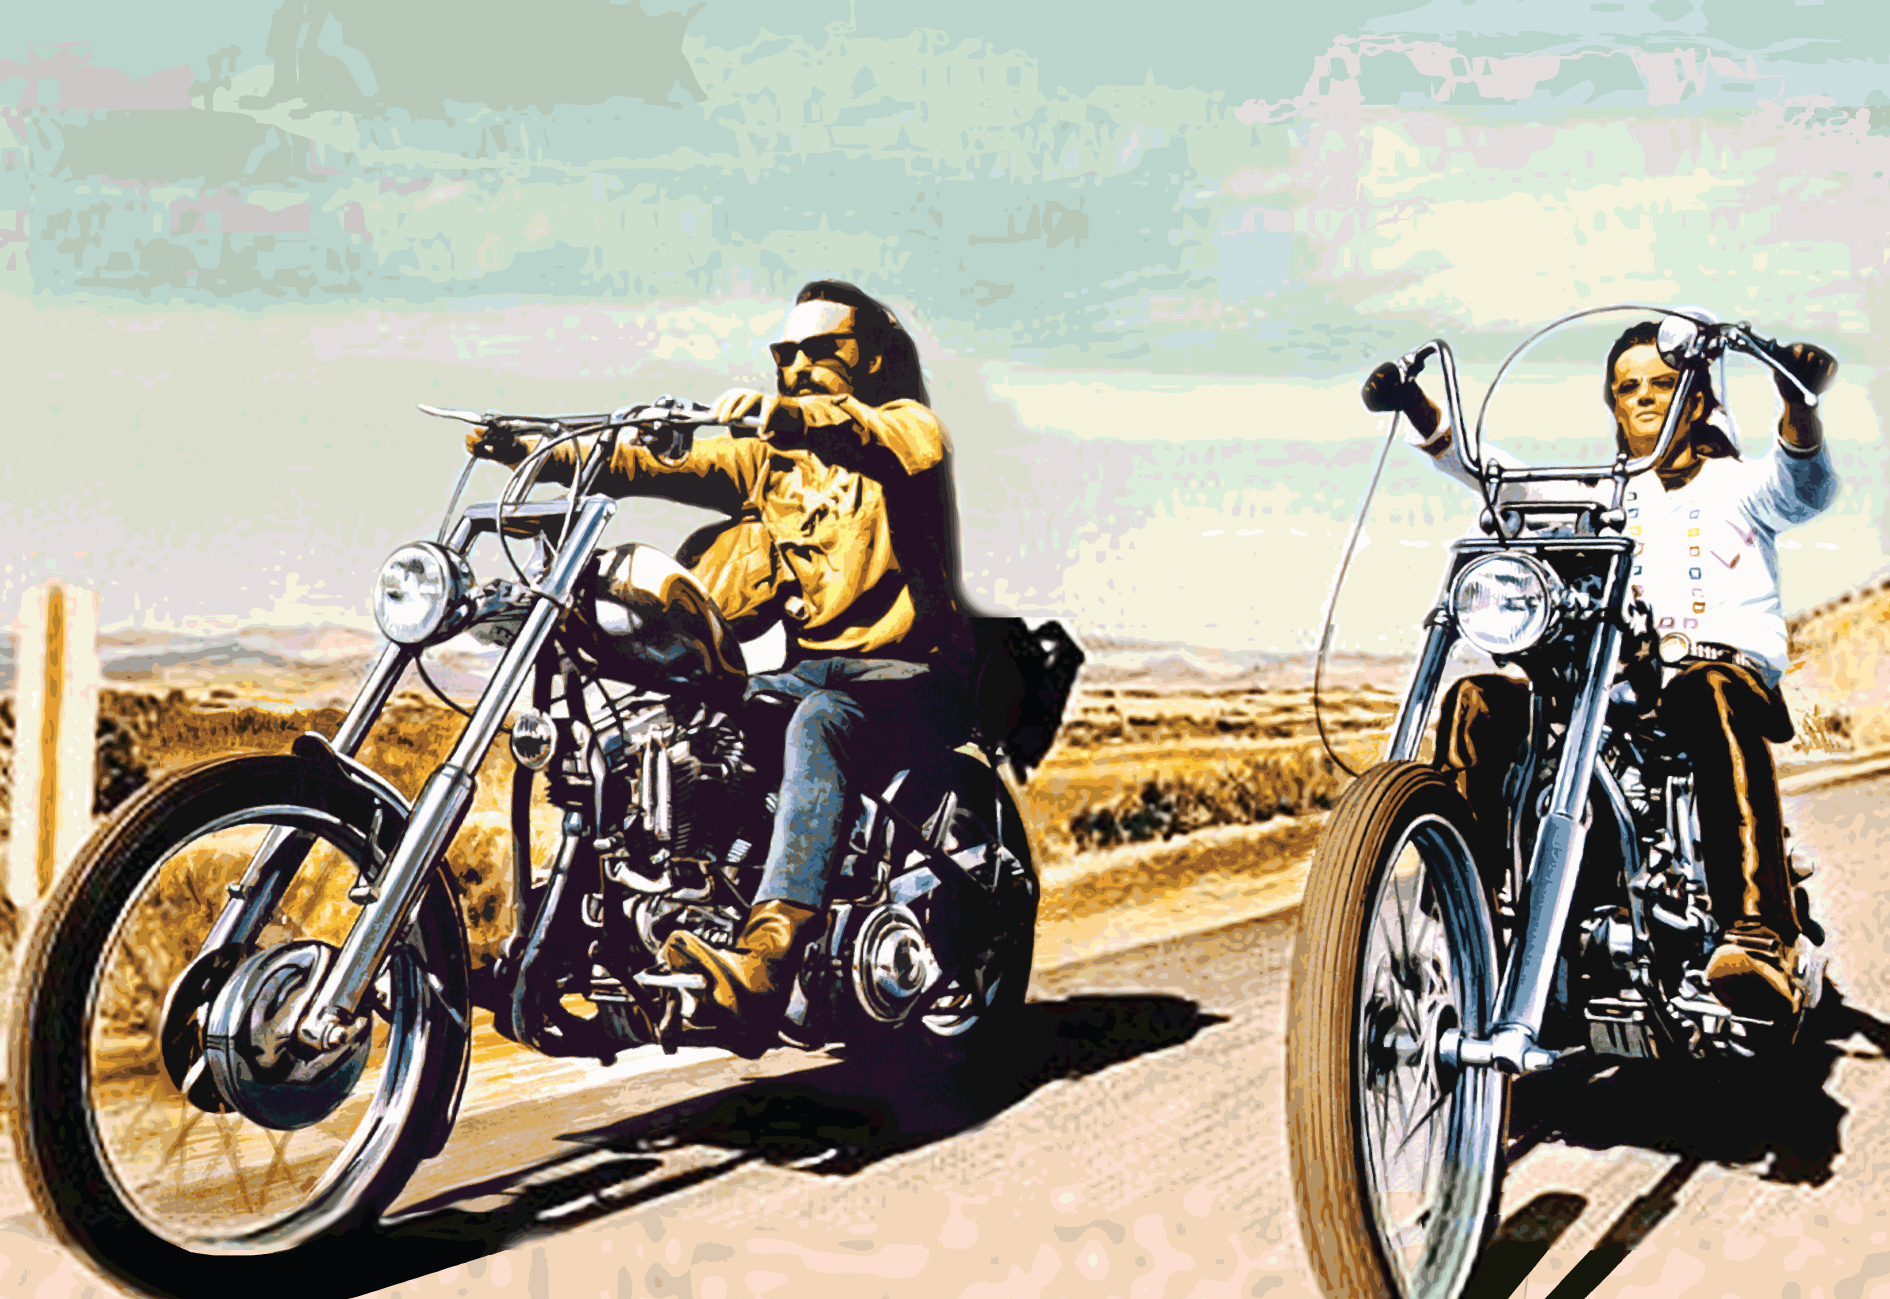 Easy Rider Magazine Art submited images